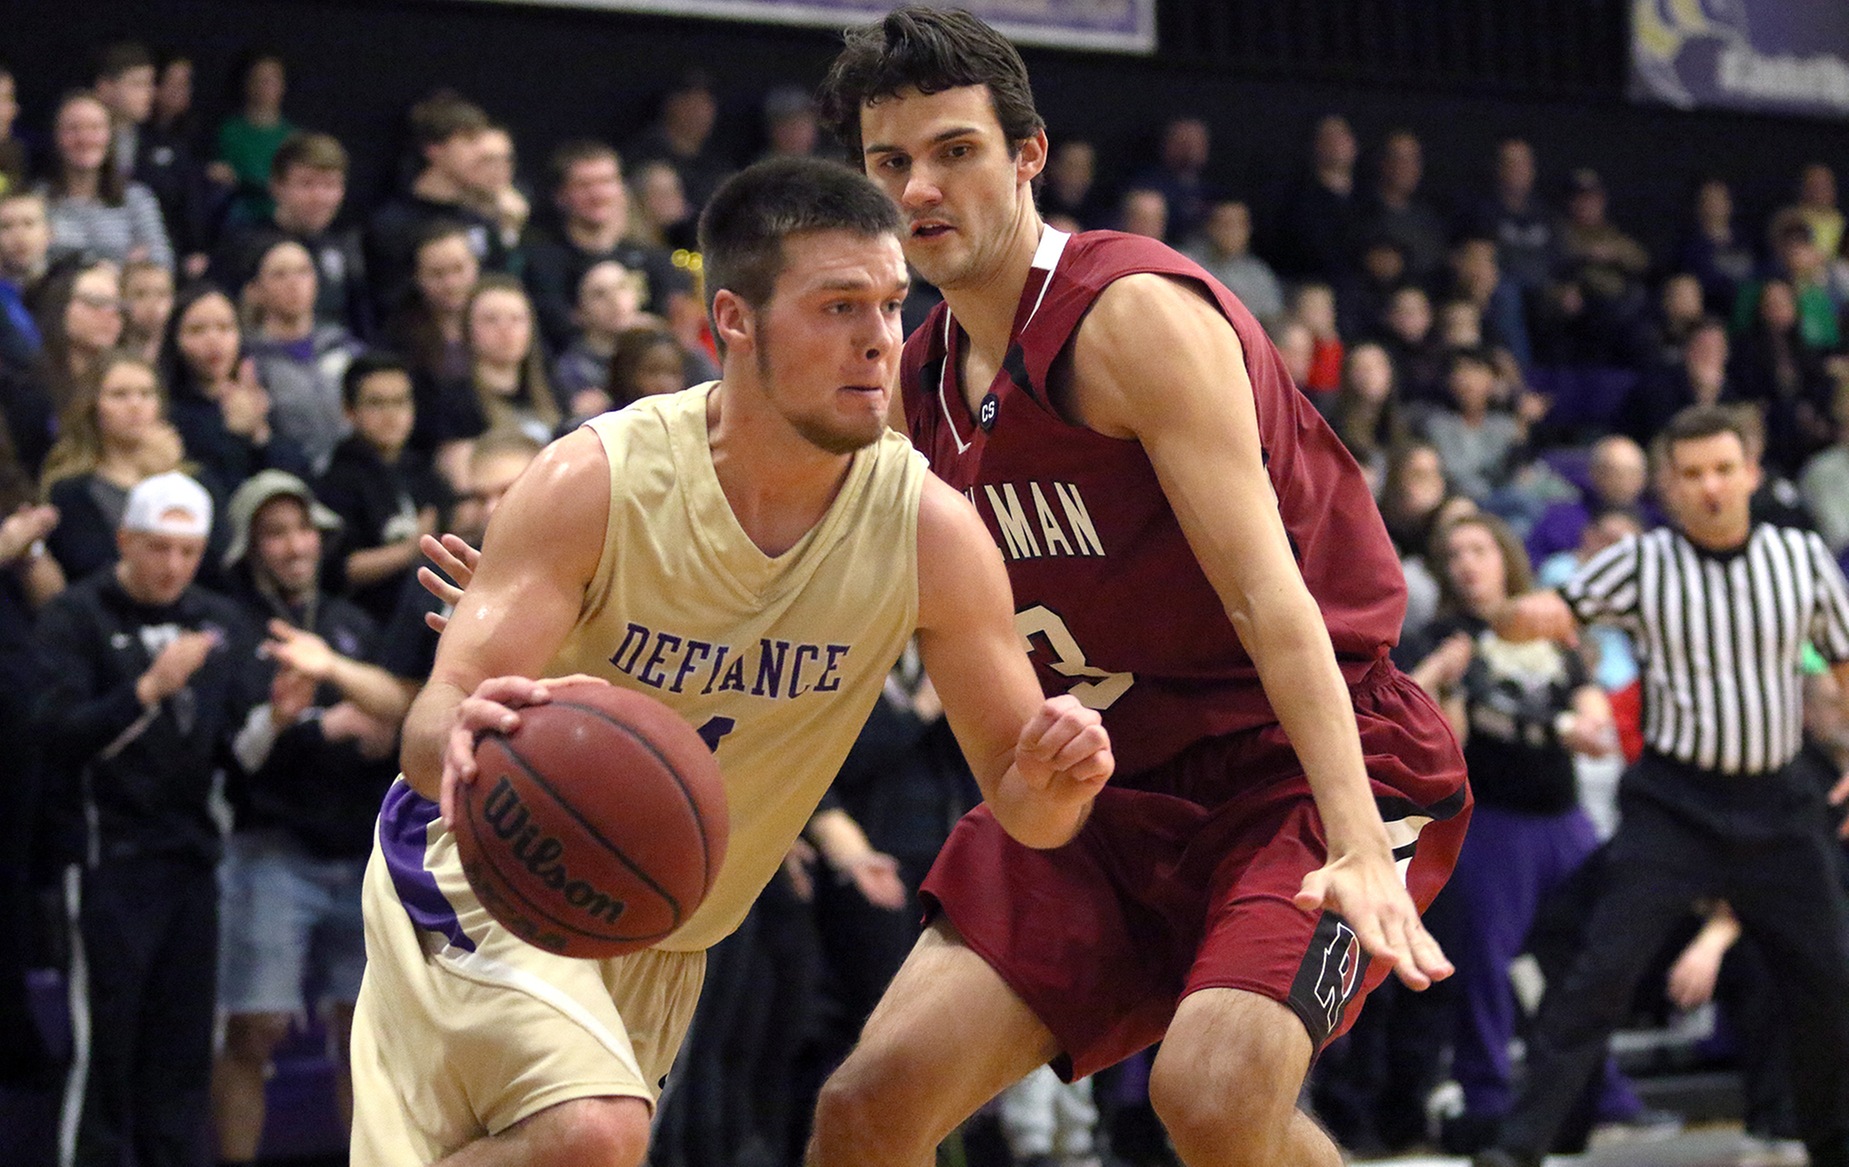 Men's Basketball Falls in HCAC Matchup Against MSJ